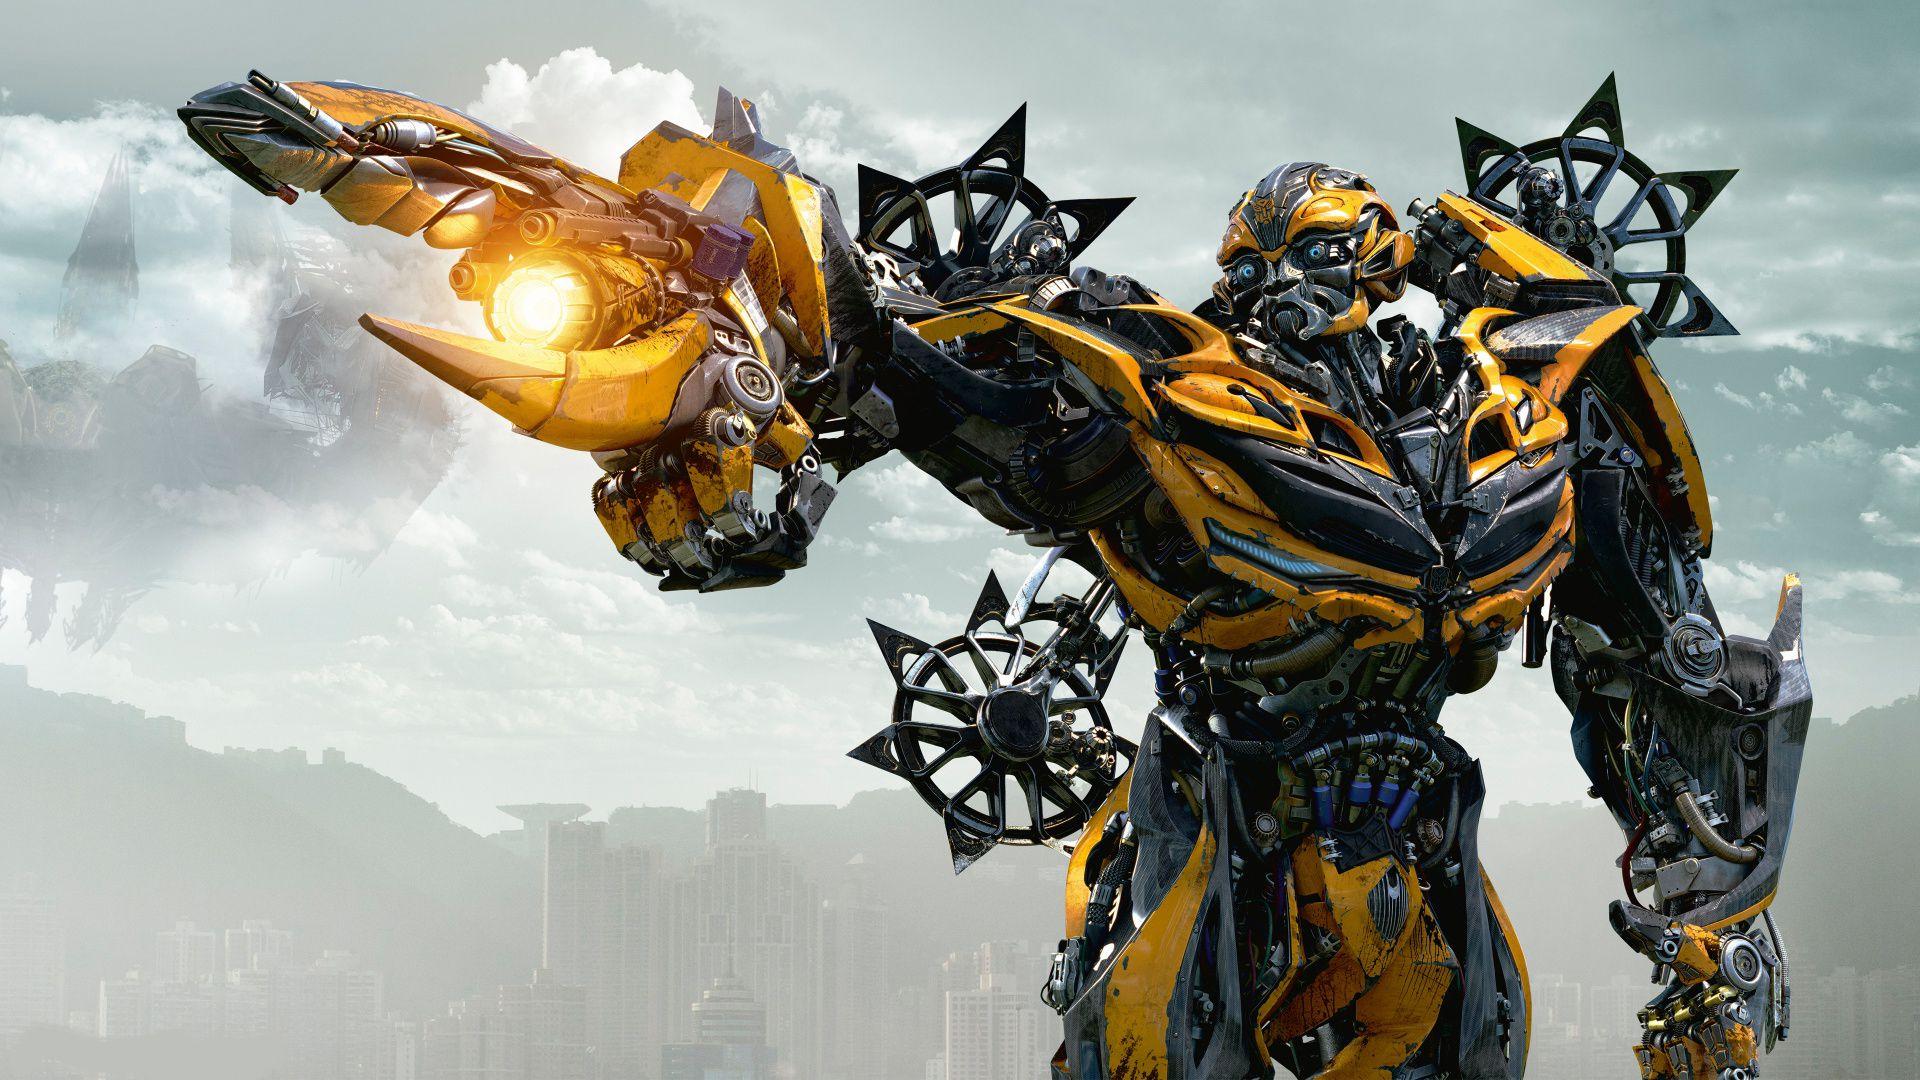 Transformers bumblebee movie wallpaper for free download about. HD